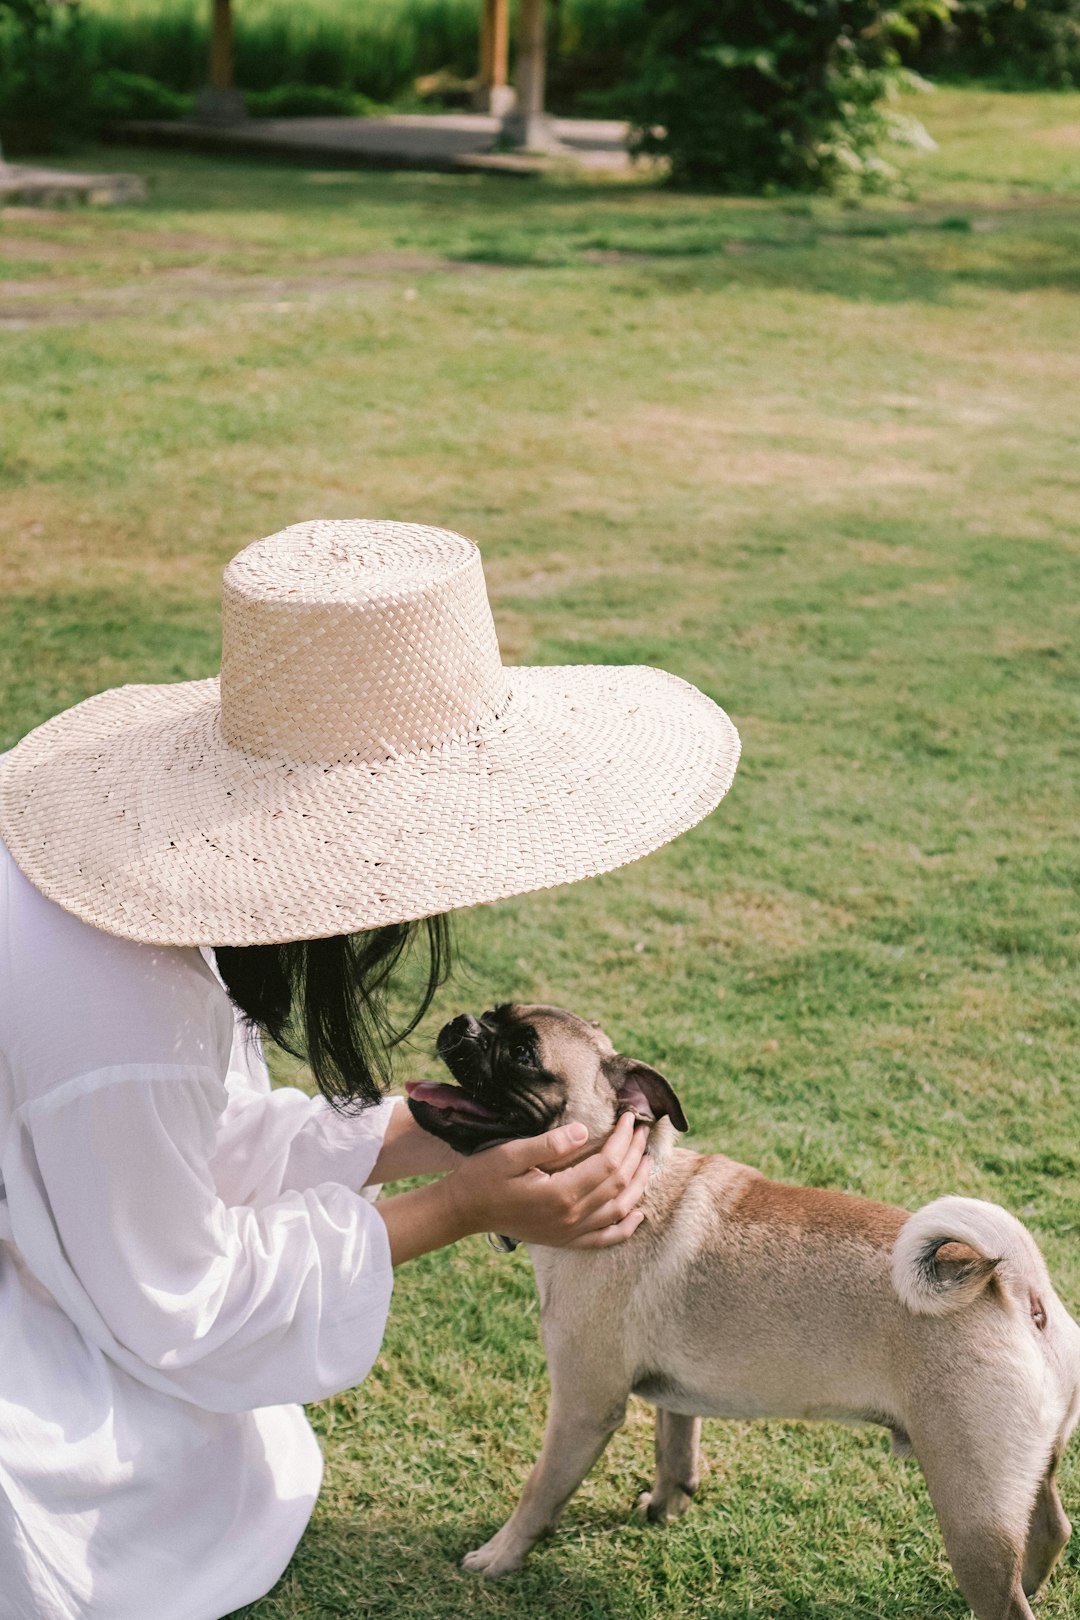 fawn pug wearing white hat